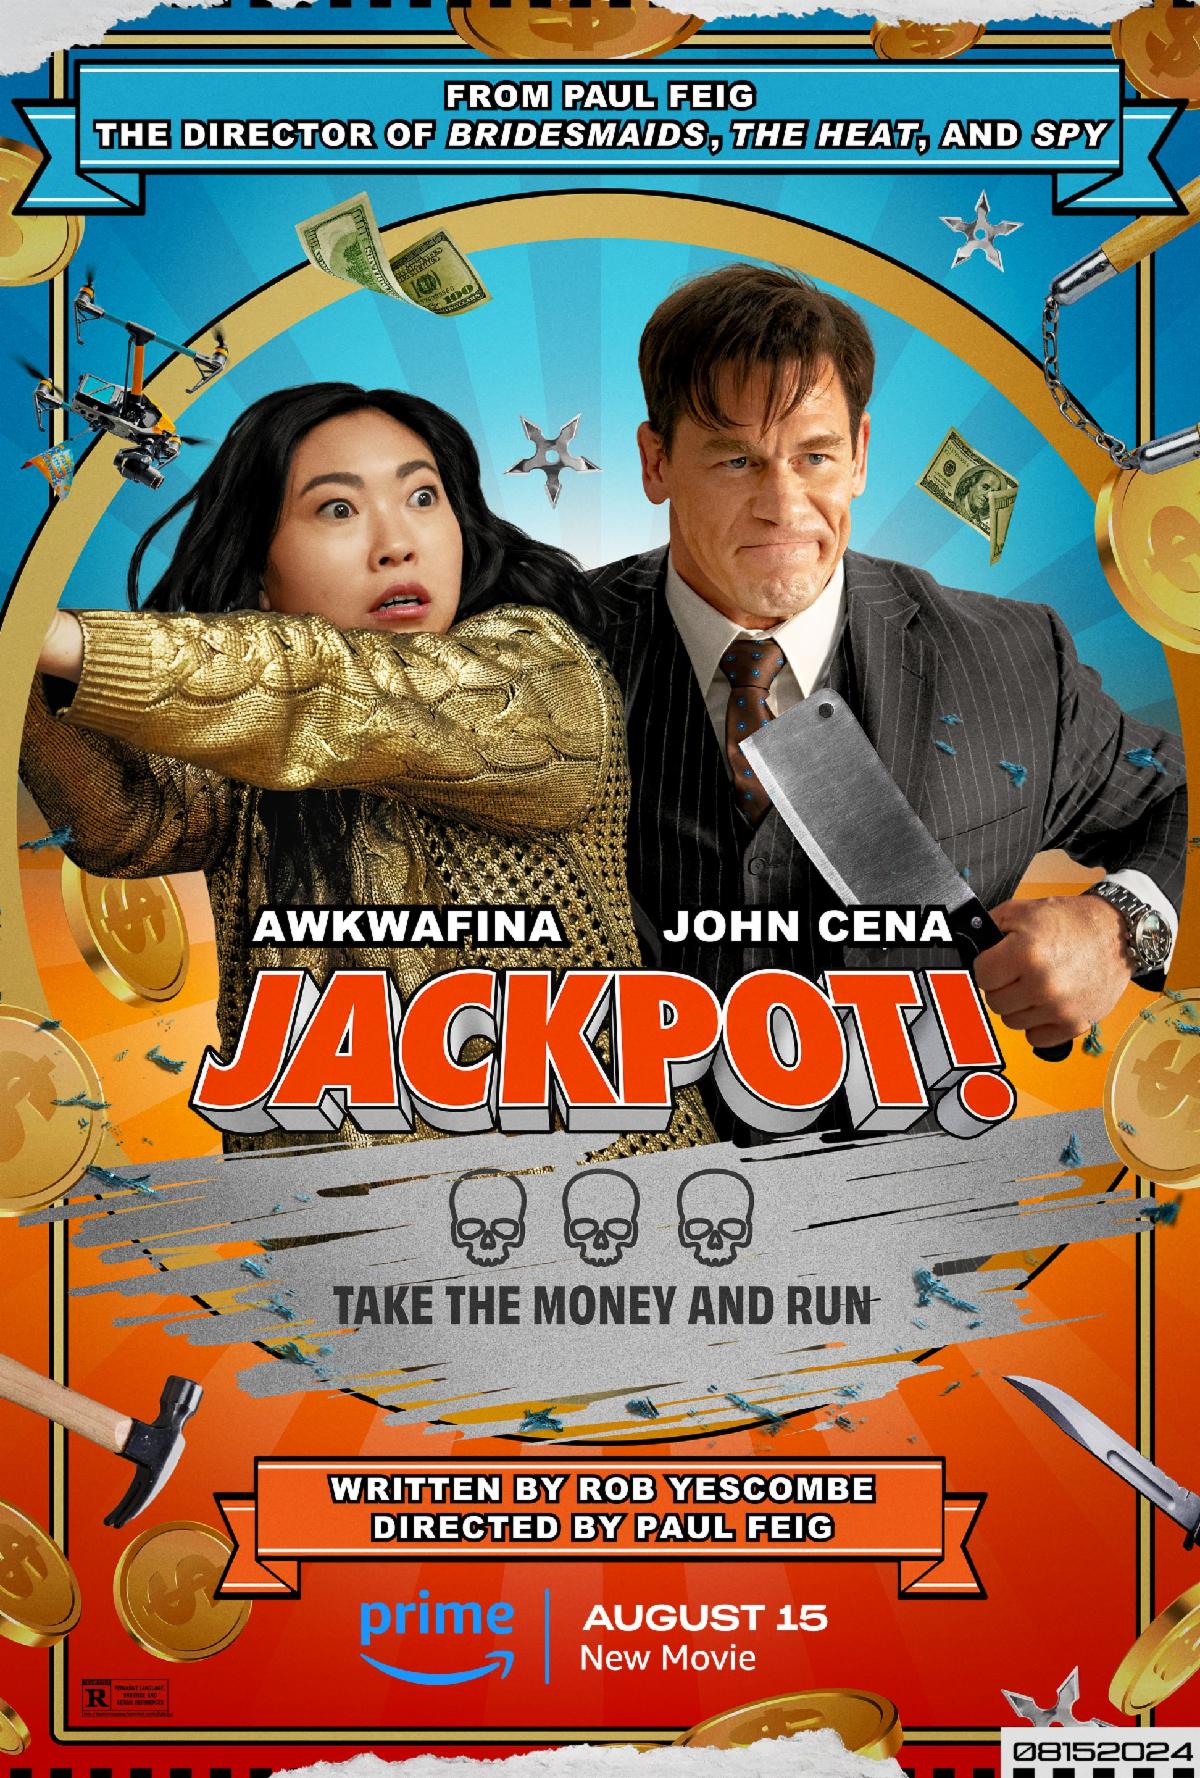 Amazon MGM Studios’ JACKPOT! | Official Trailer and Poster | Starring Awkwafina and John Cena